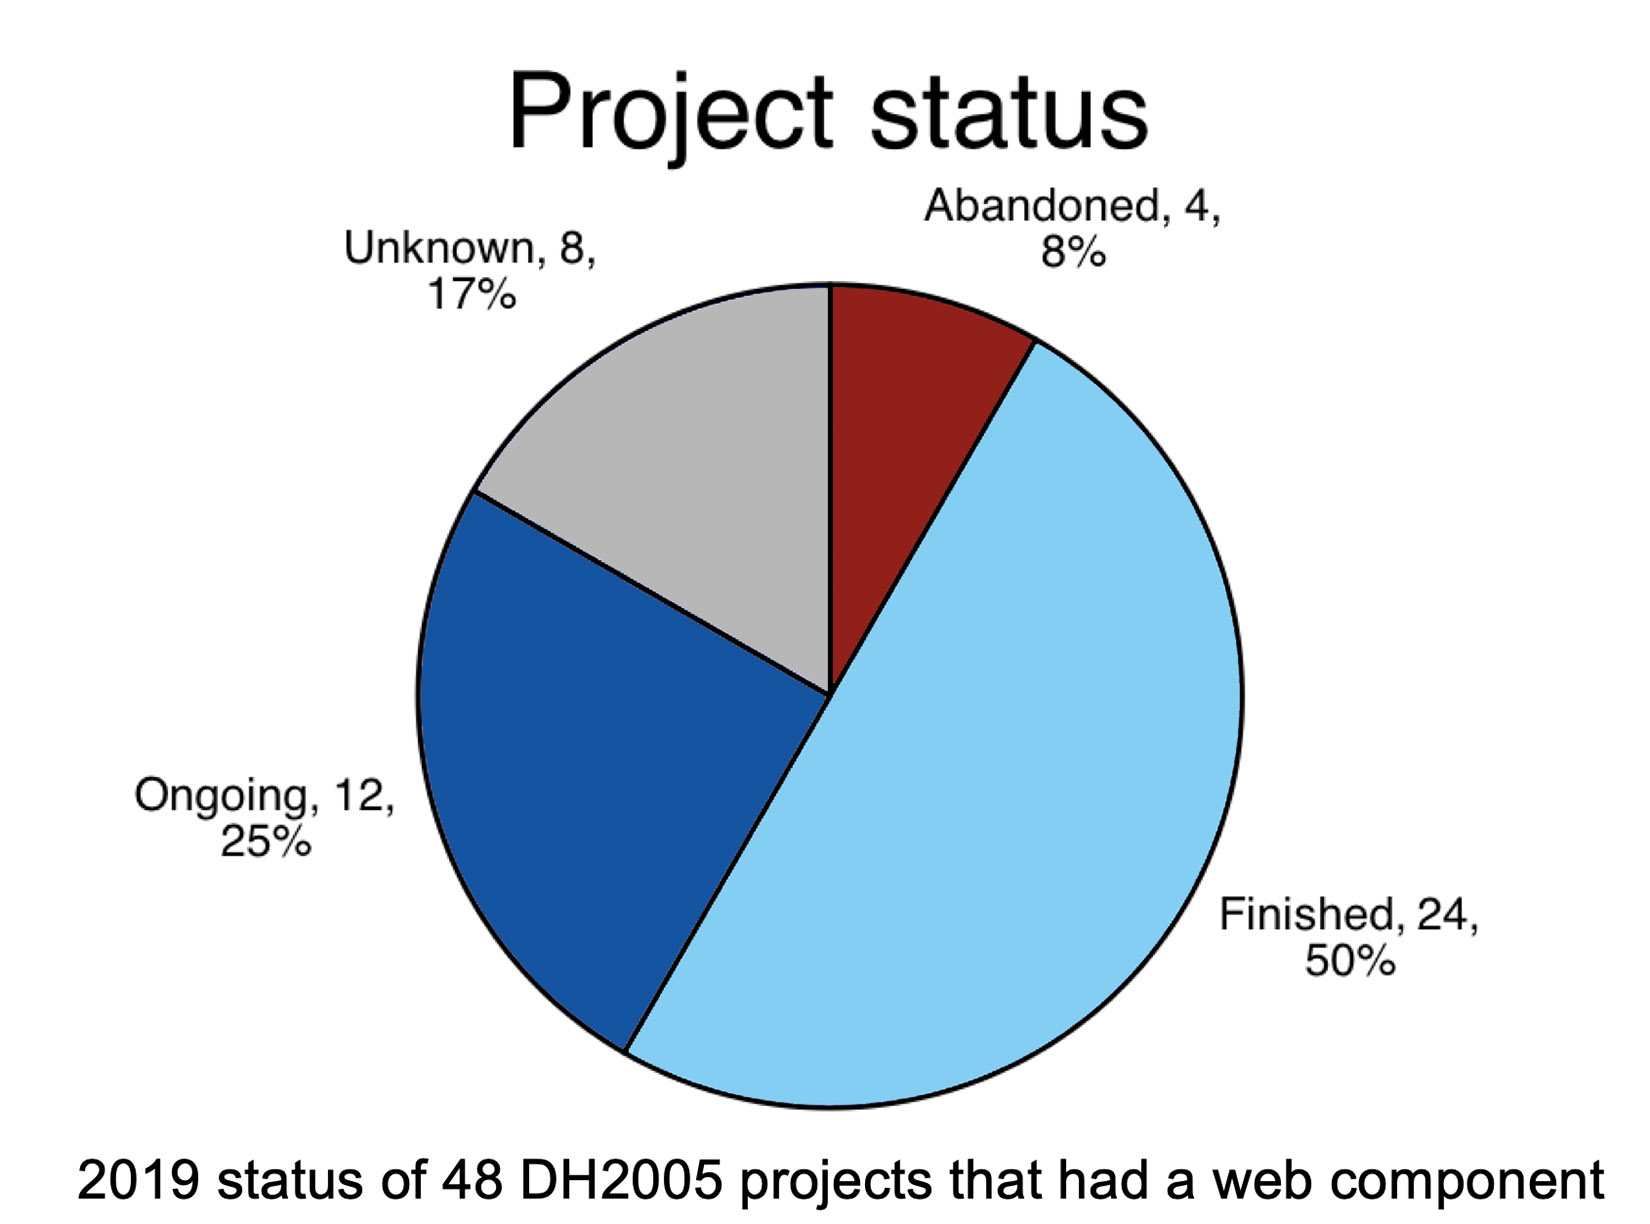 Pie chart of project status for DH 2005 projects with web component